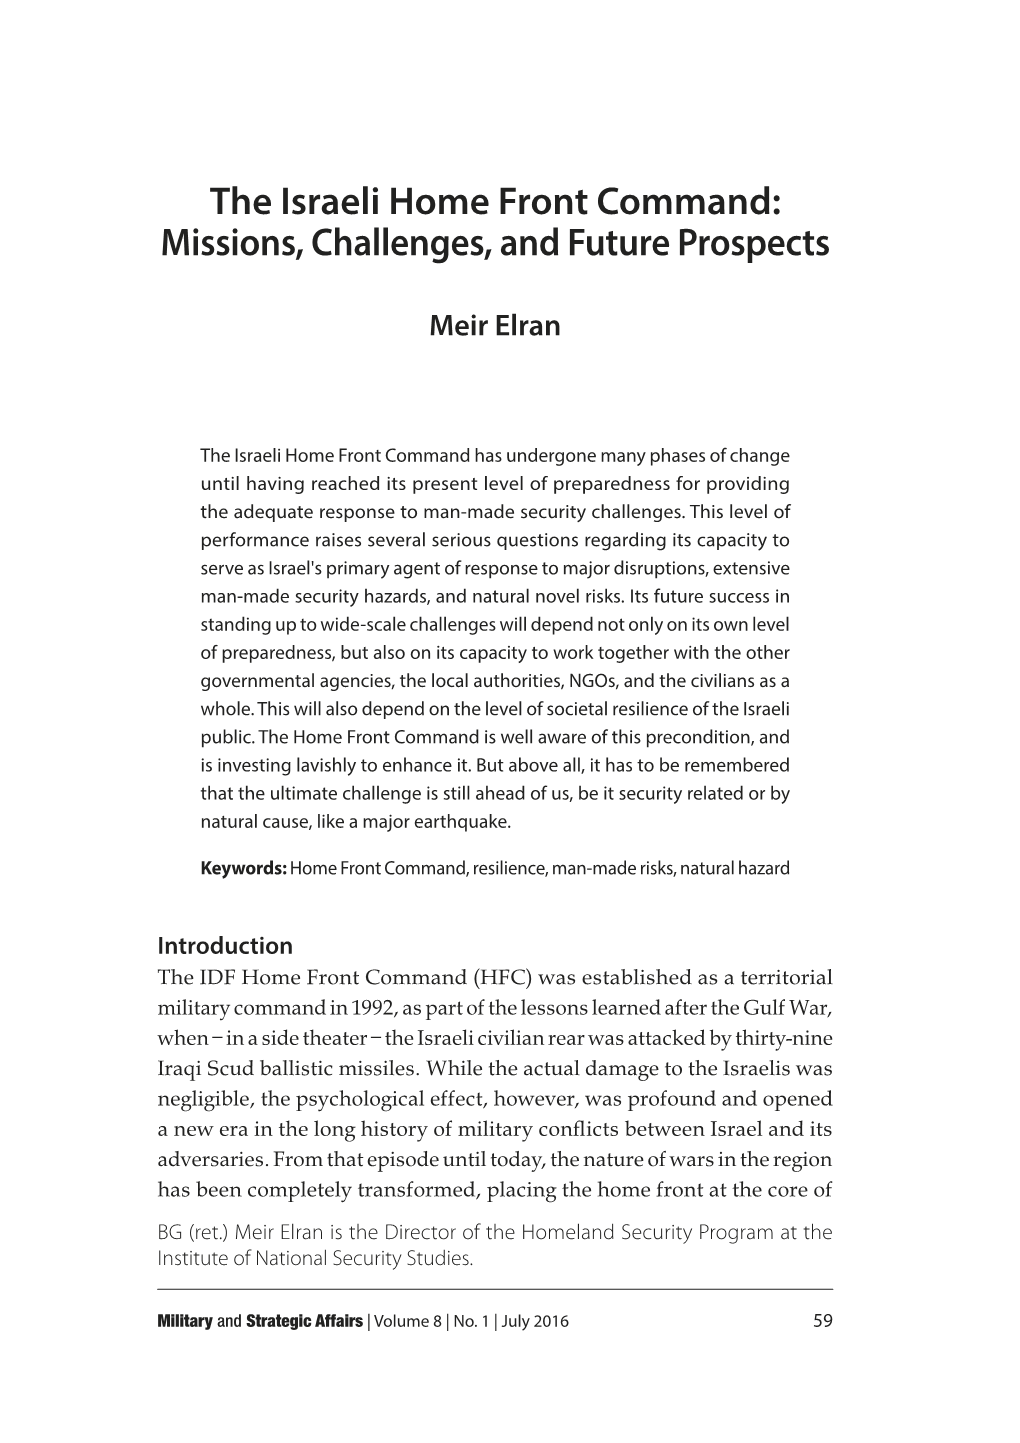 The Israeli Home Front Command: Missions, Challenges, and Future Prospects